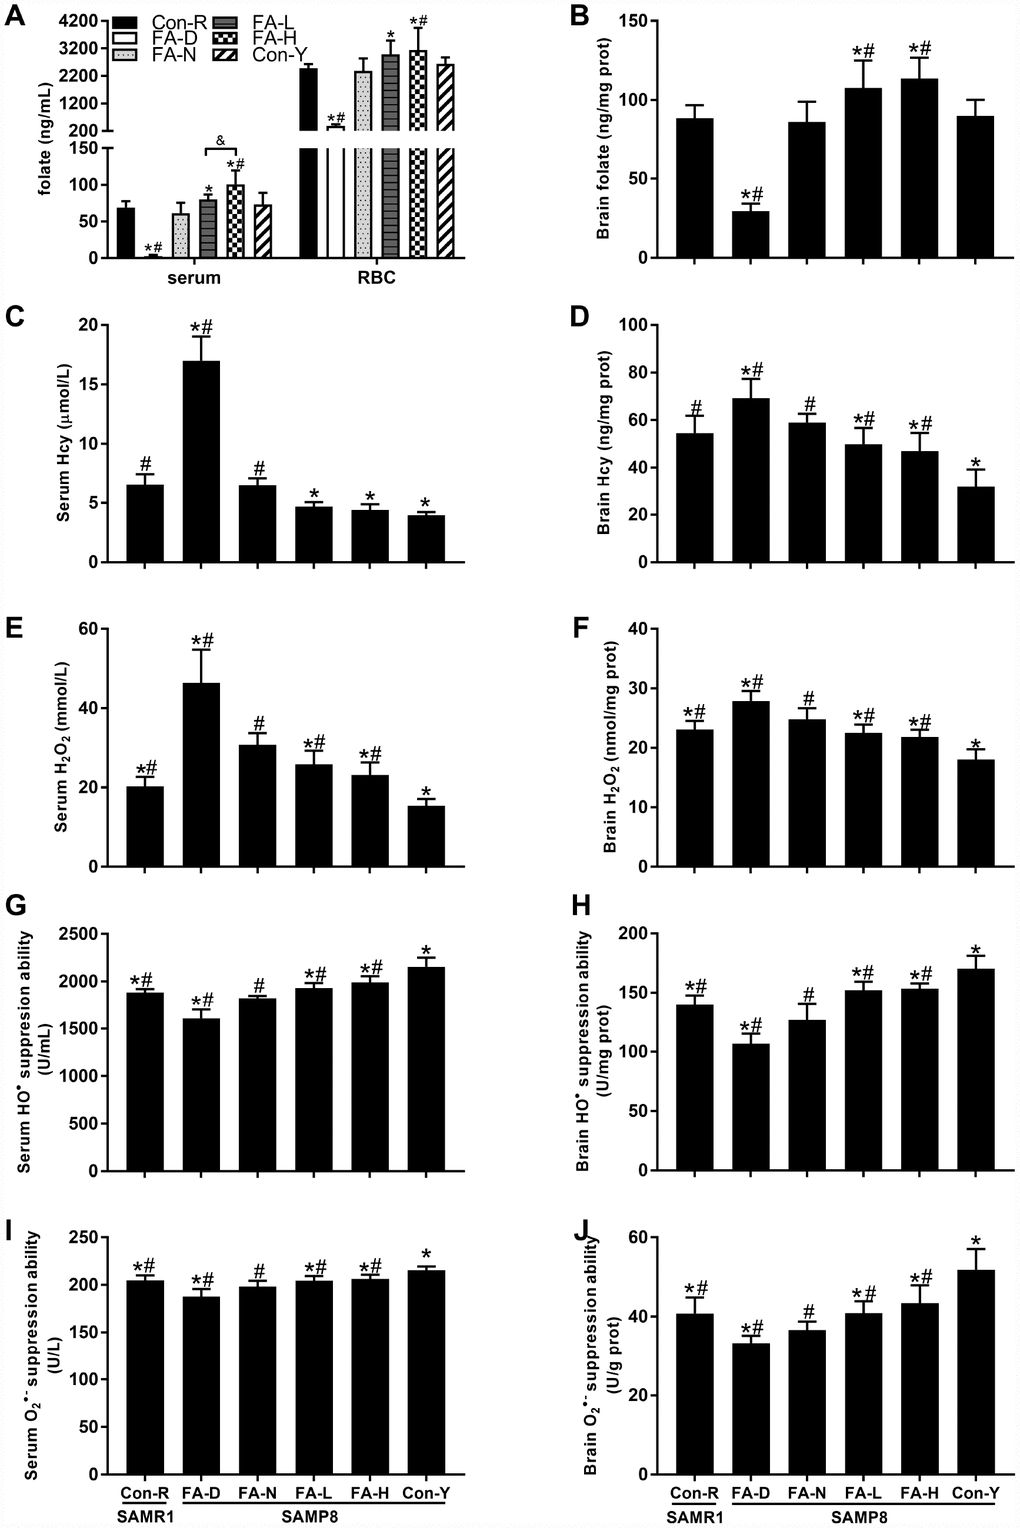 Dietary folic acid (FA) supplementation raised folate concentrations and decreased reactive oxygen species (ROS) levels in Senescence Accelerated Mouse Prone 8 (SAMP8) mice. Aged SAMP8 mice were assigned to four treatment groups: FA-deficient diet (FA-D) group, FA-normal diet (FA-N) group, low FA-supplemented diet (FA-L) group, and high FA-supplemented diet (FA-H) group. There were also an age-matched senescence-accelerated mouse resistant 1 (SAMR1) control group (Con-R), and a young SAMP8 control group (Con-Y), both of which were fed with FA-normal diet. Folate concentrations were detected in serum [F(5,54) = 65.507, PF(5,54) = 39.041, PA) and brain [F(5,54) = 64.878, PB). Hcy concentrations were detected in serum [F(5,54) = 250.012, PC) and brain [F(5,54) = 29.529, PD). ROS levels were indicated by H2O2 levels in serum [F(5,54) = 64.322, PE) and brain [F(5,54) = 44.100, PF), HO• suppression abilities in serum [F(5,54) = 71.992, PG) and brain [F(5,54) = 65.702, PH), and O2• – suppression abilities in serum [F(5,54) = 26.796, PI) and brain [F(5,54) = 30.031, PJ). Data are expressed as mean ± standard deviation (SD) (n= 10 mice/group). *P#P&P